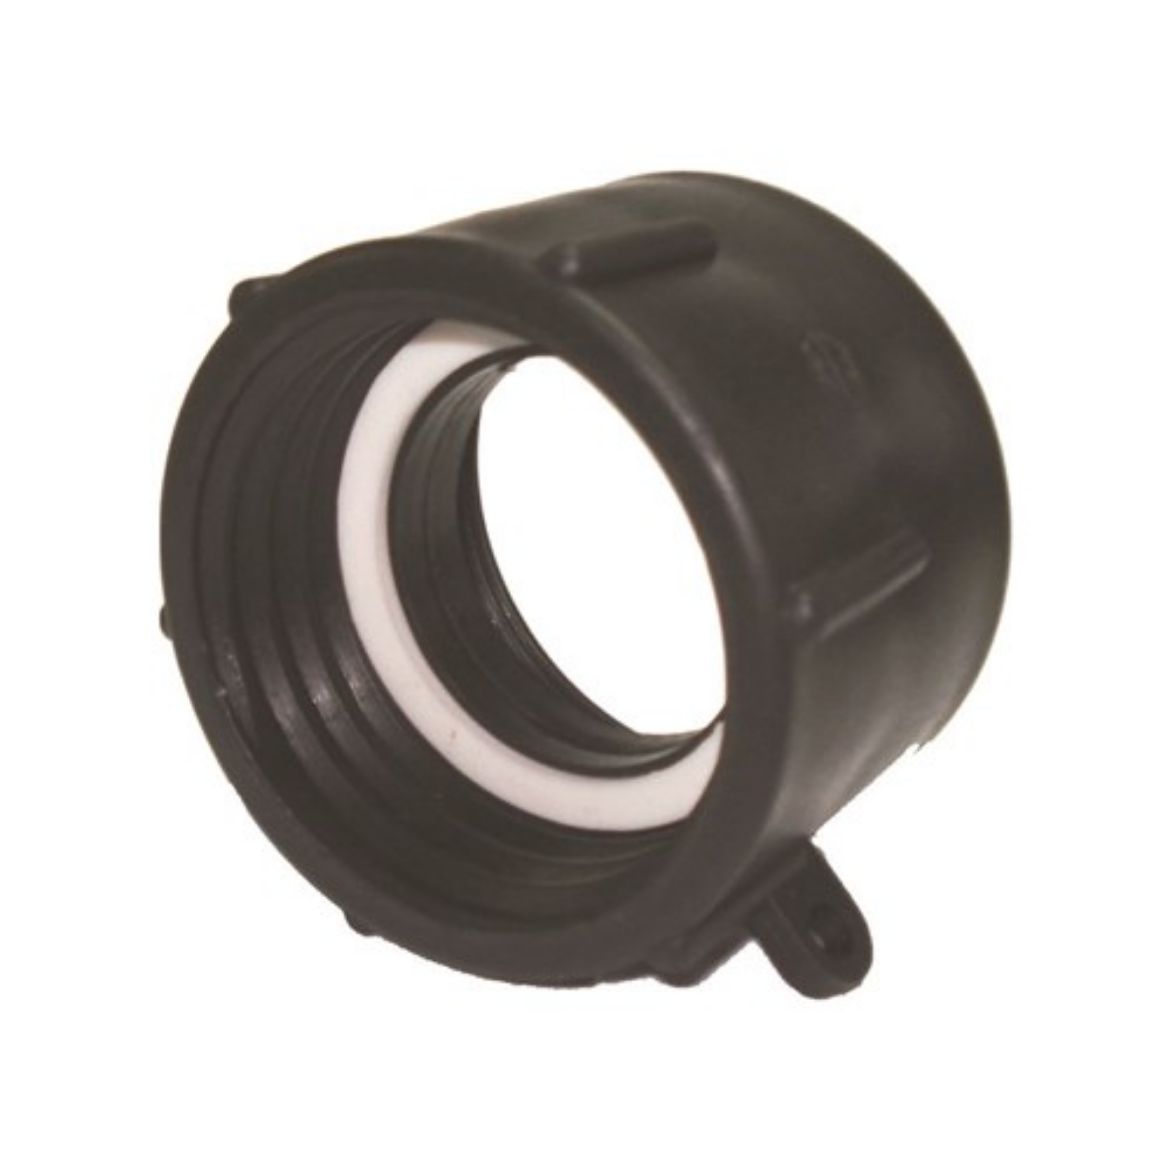 Picture of ADAPTOR IBC 50MM BUTTRESS 50MM BSP